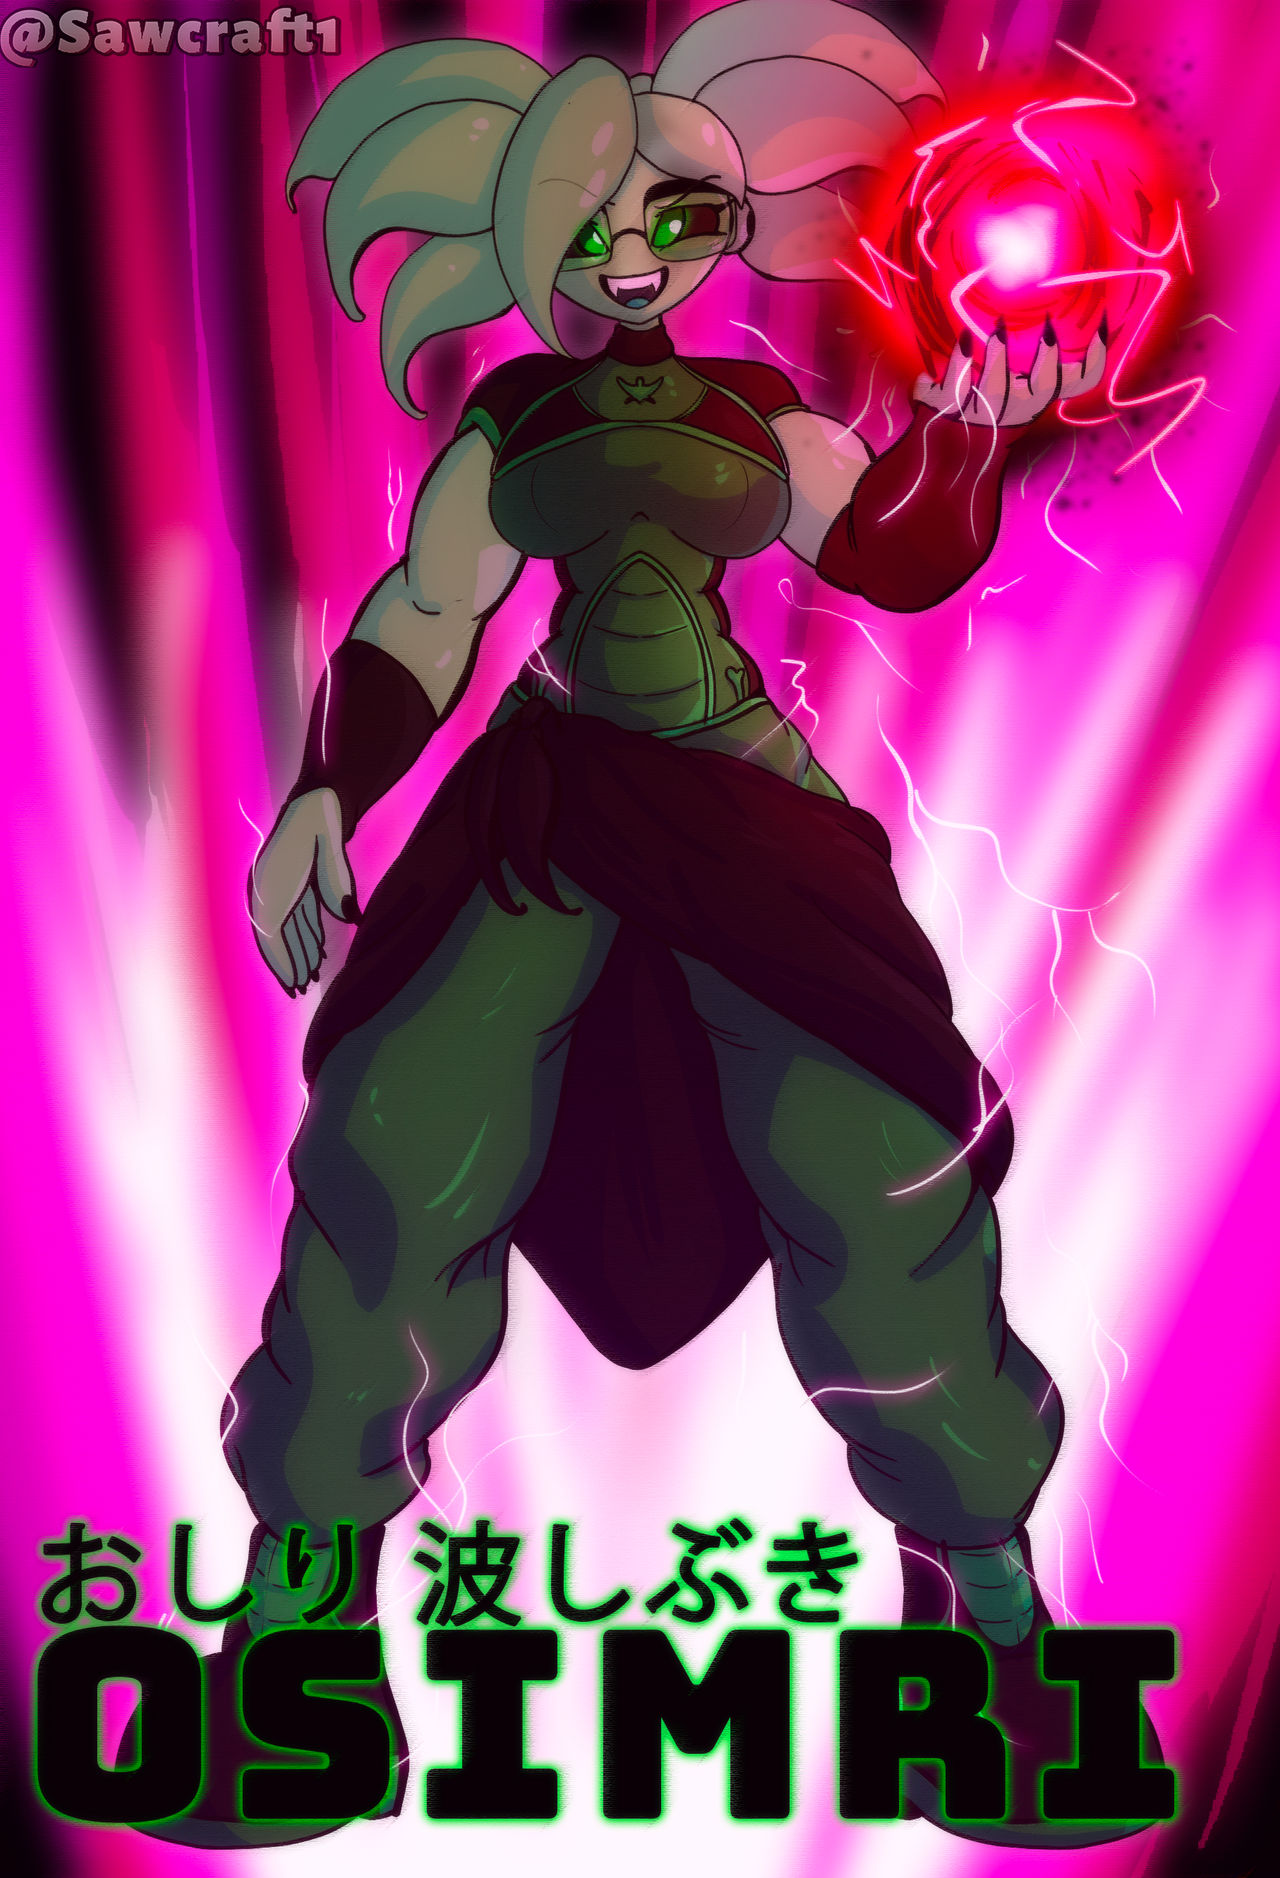 i looked up female majin and this is what i found